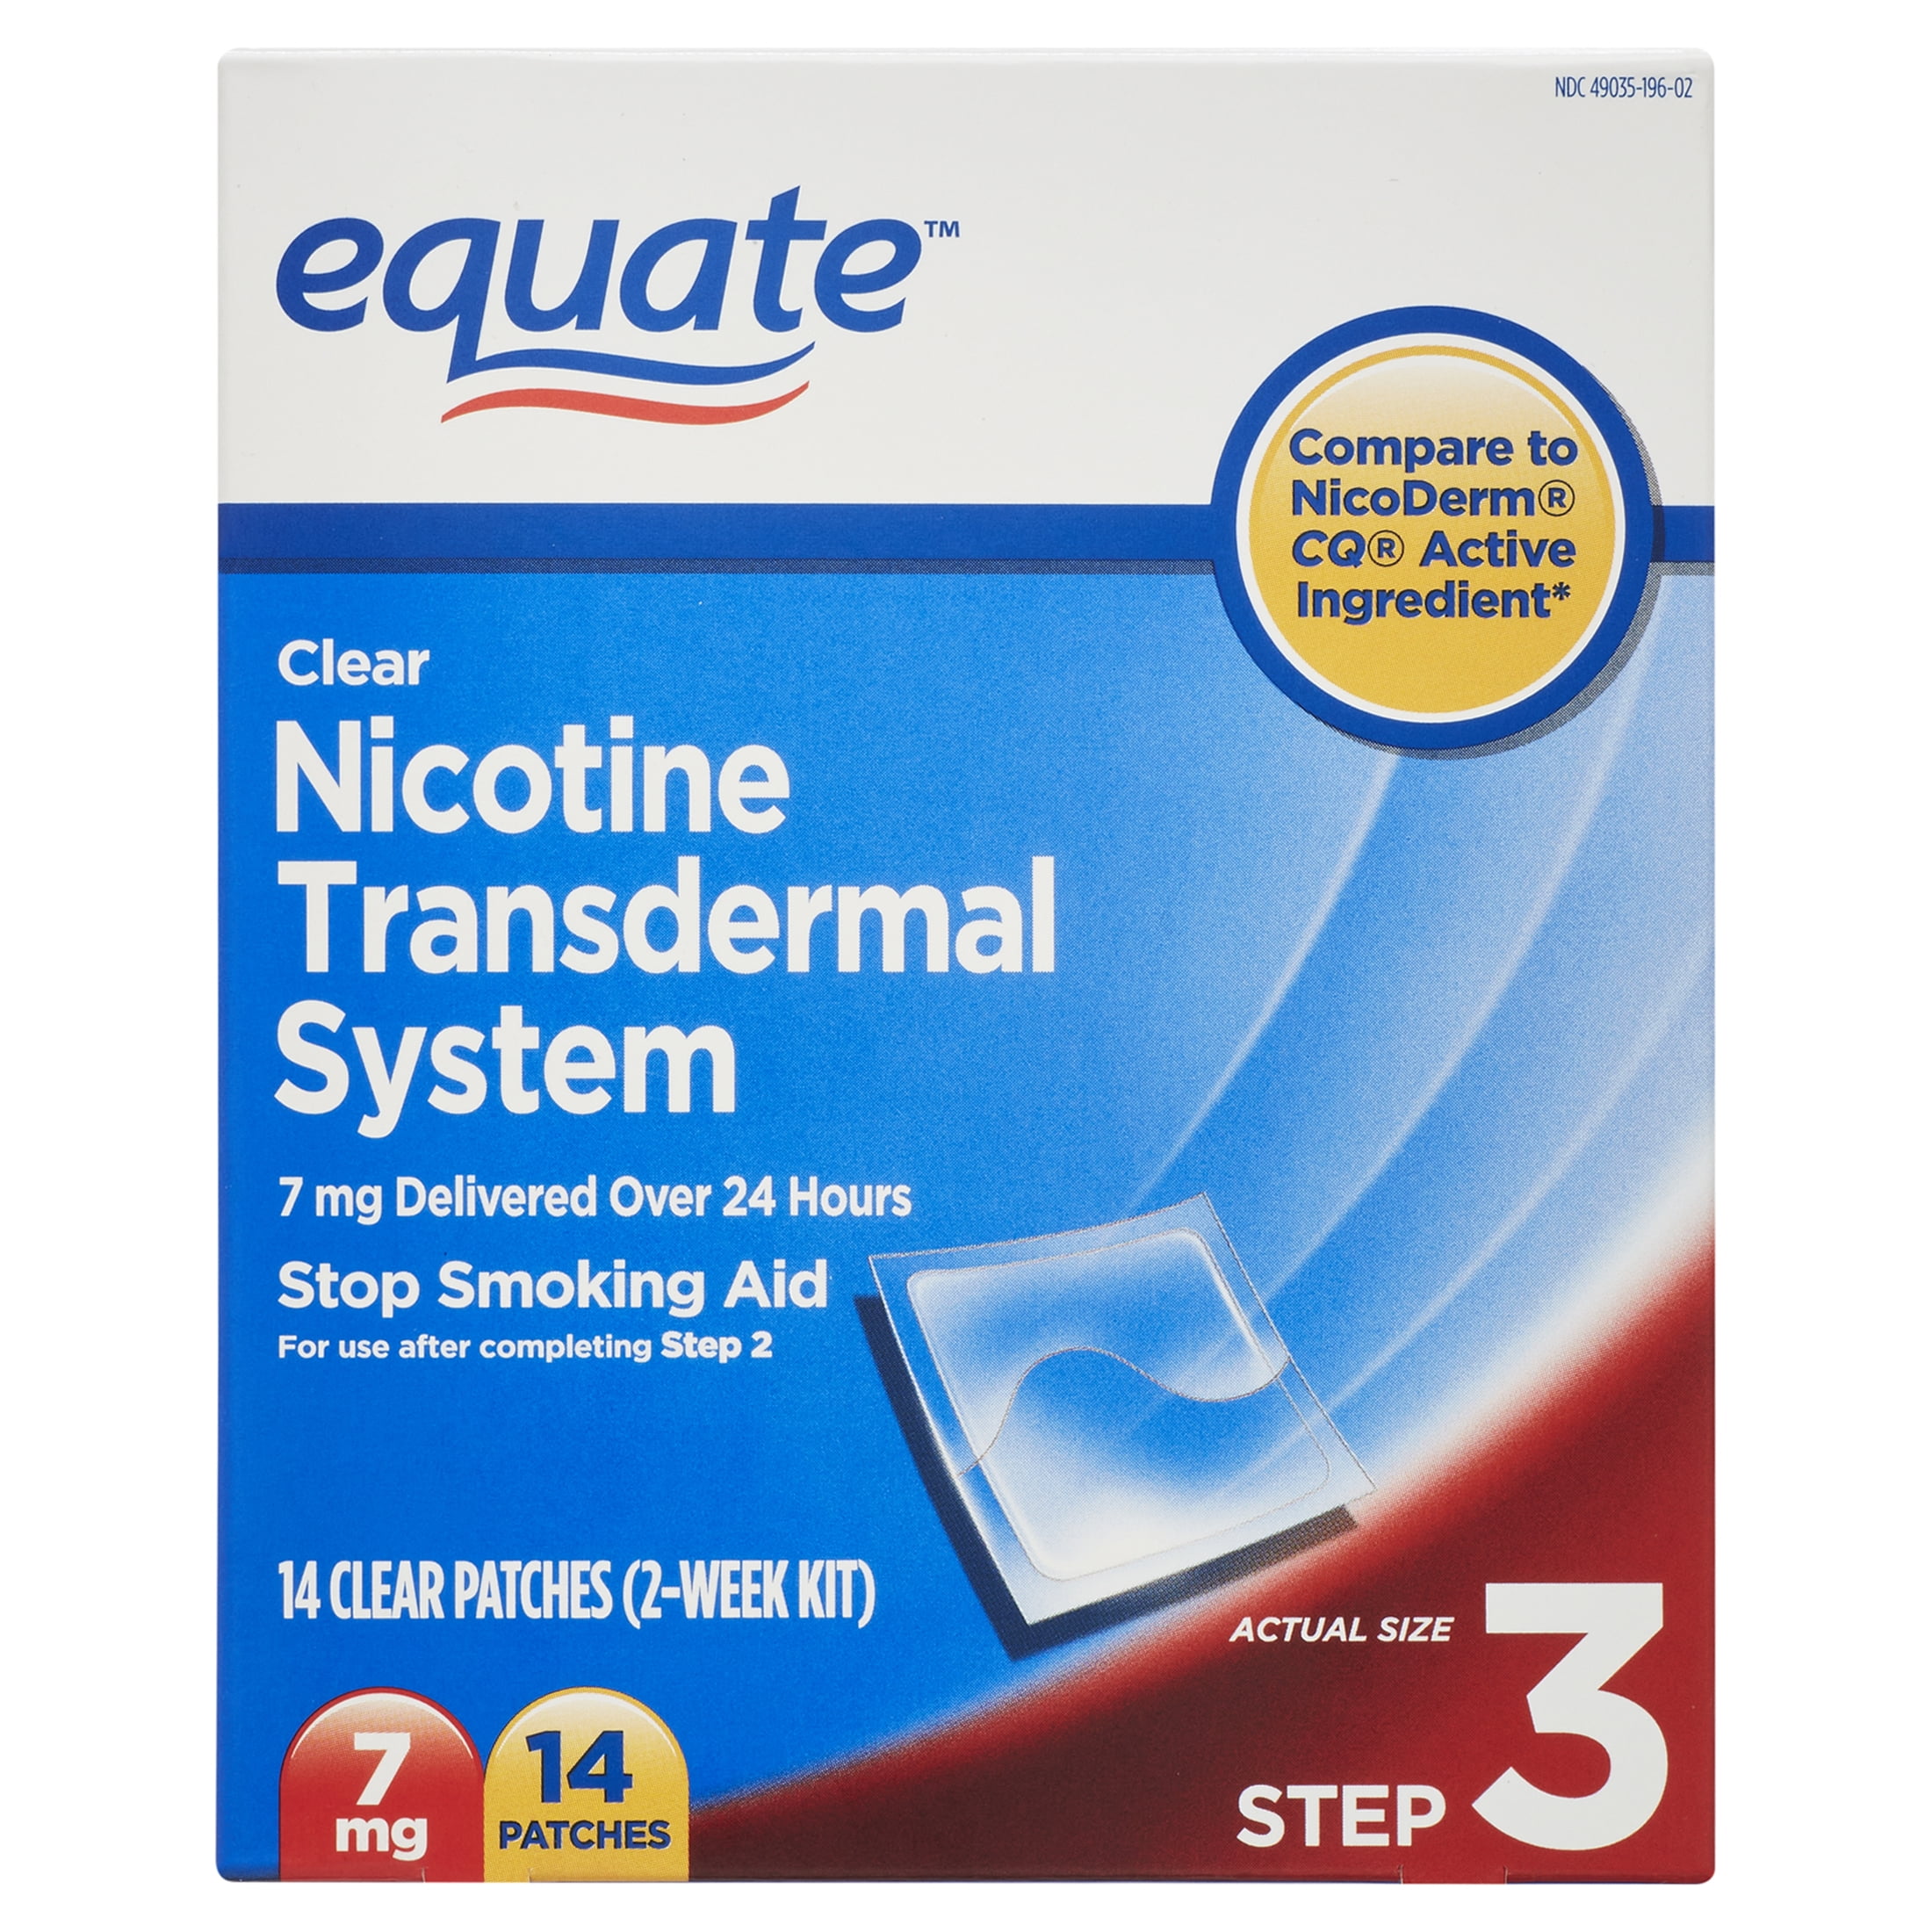 Can I Wear 2 7 Mg Nicotine Patches?